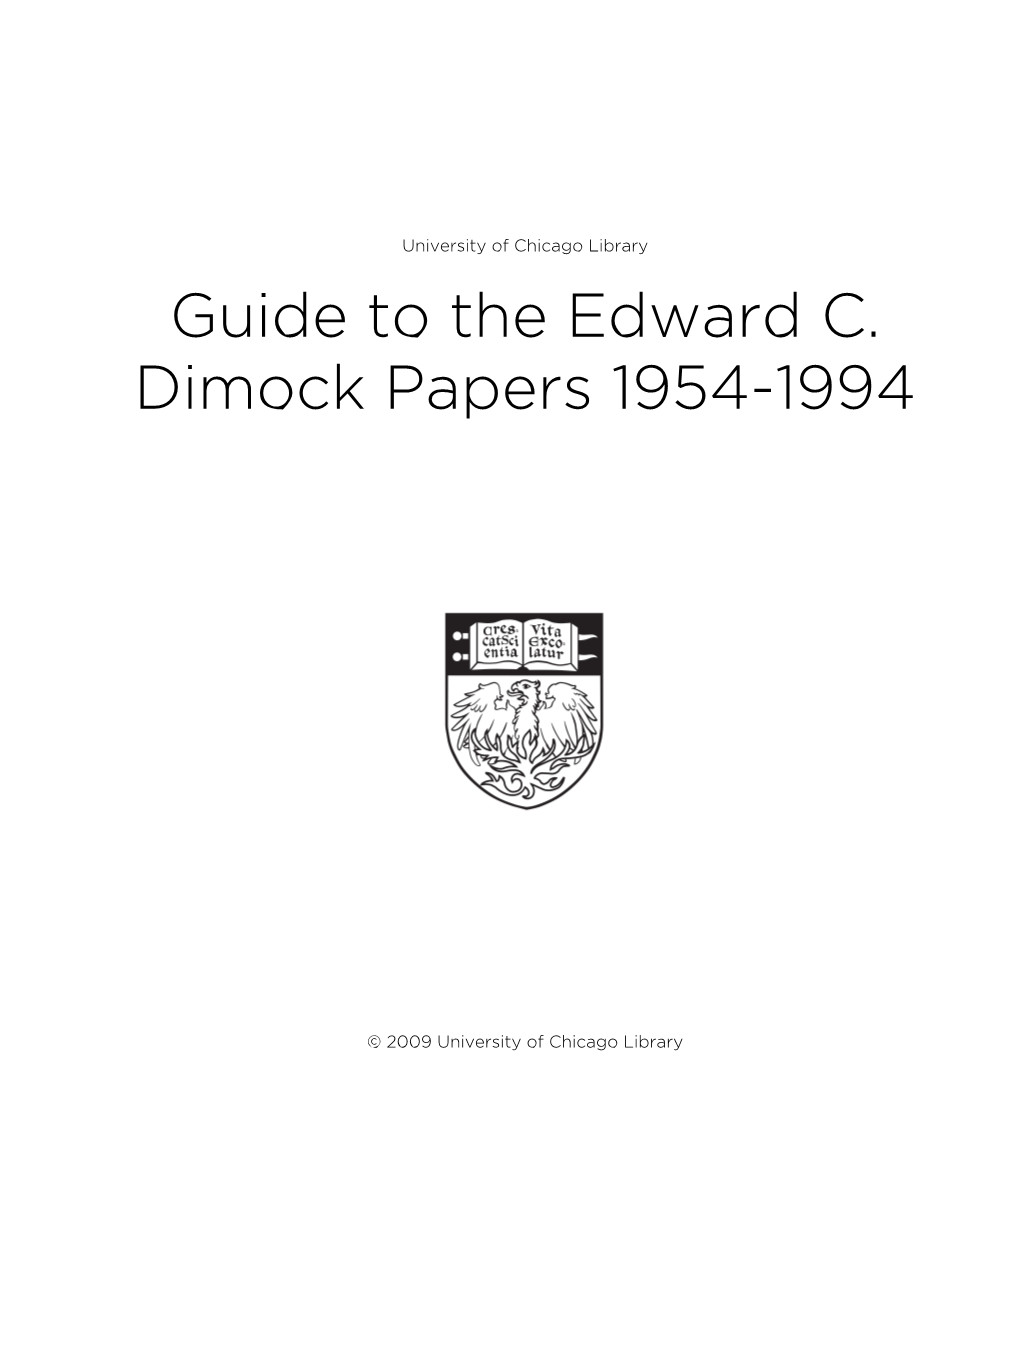 Guide to the Edward C. Dimock Papers 1954-1994